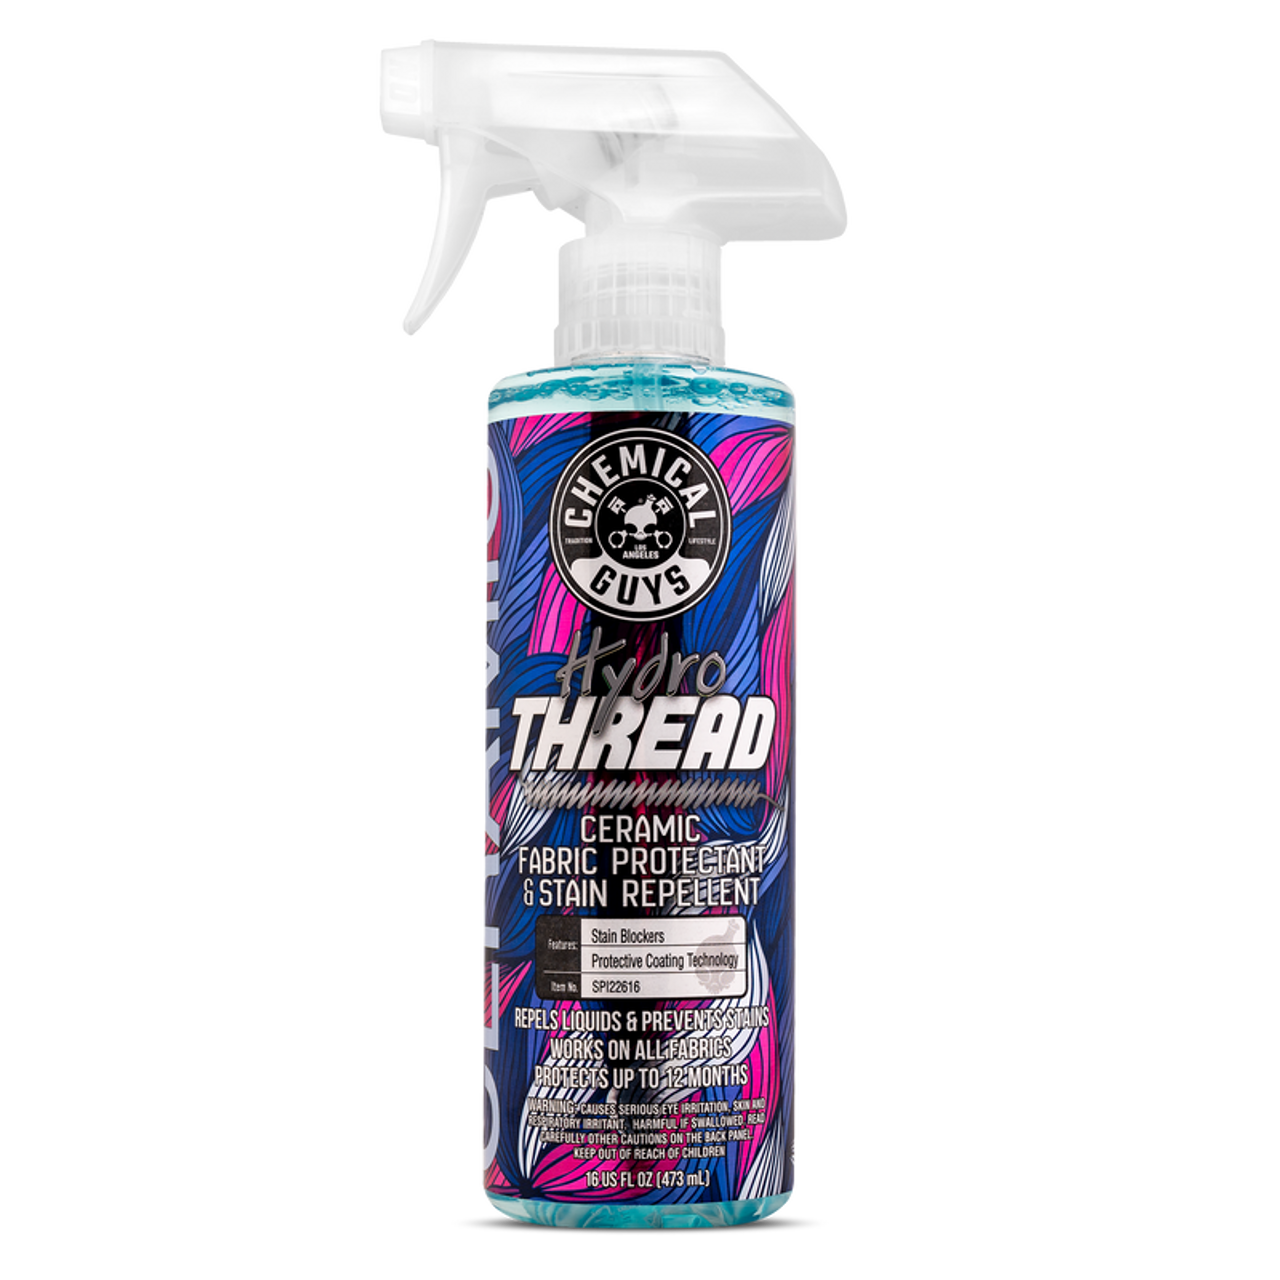 Chemical Guys HydroThread Ceramic Fabric Protectant & Stain Repellent